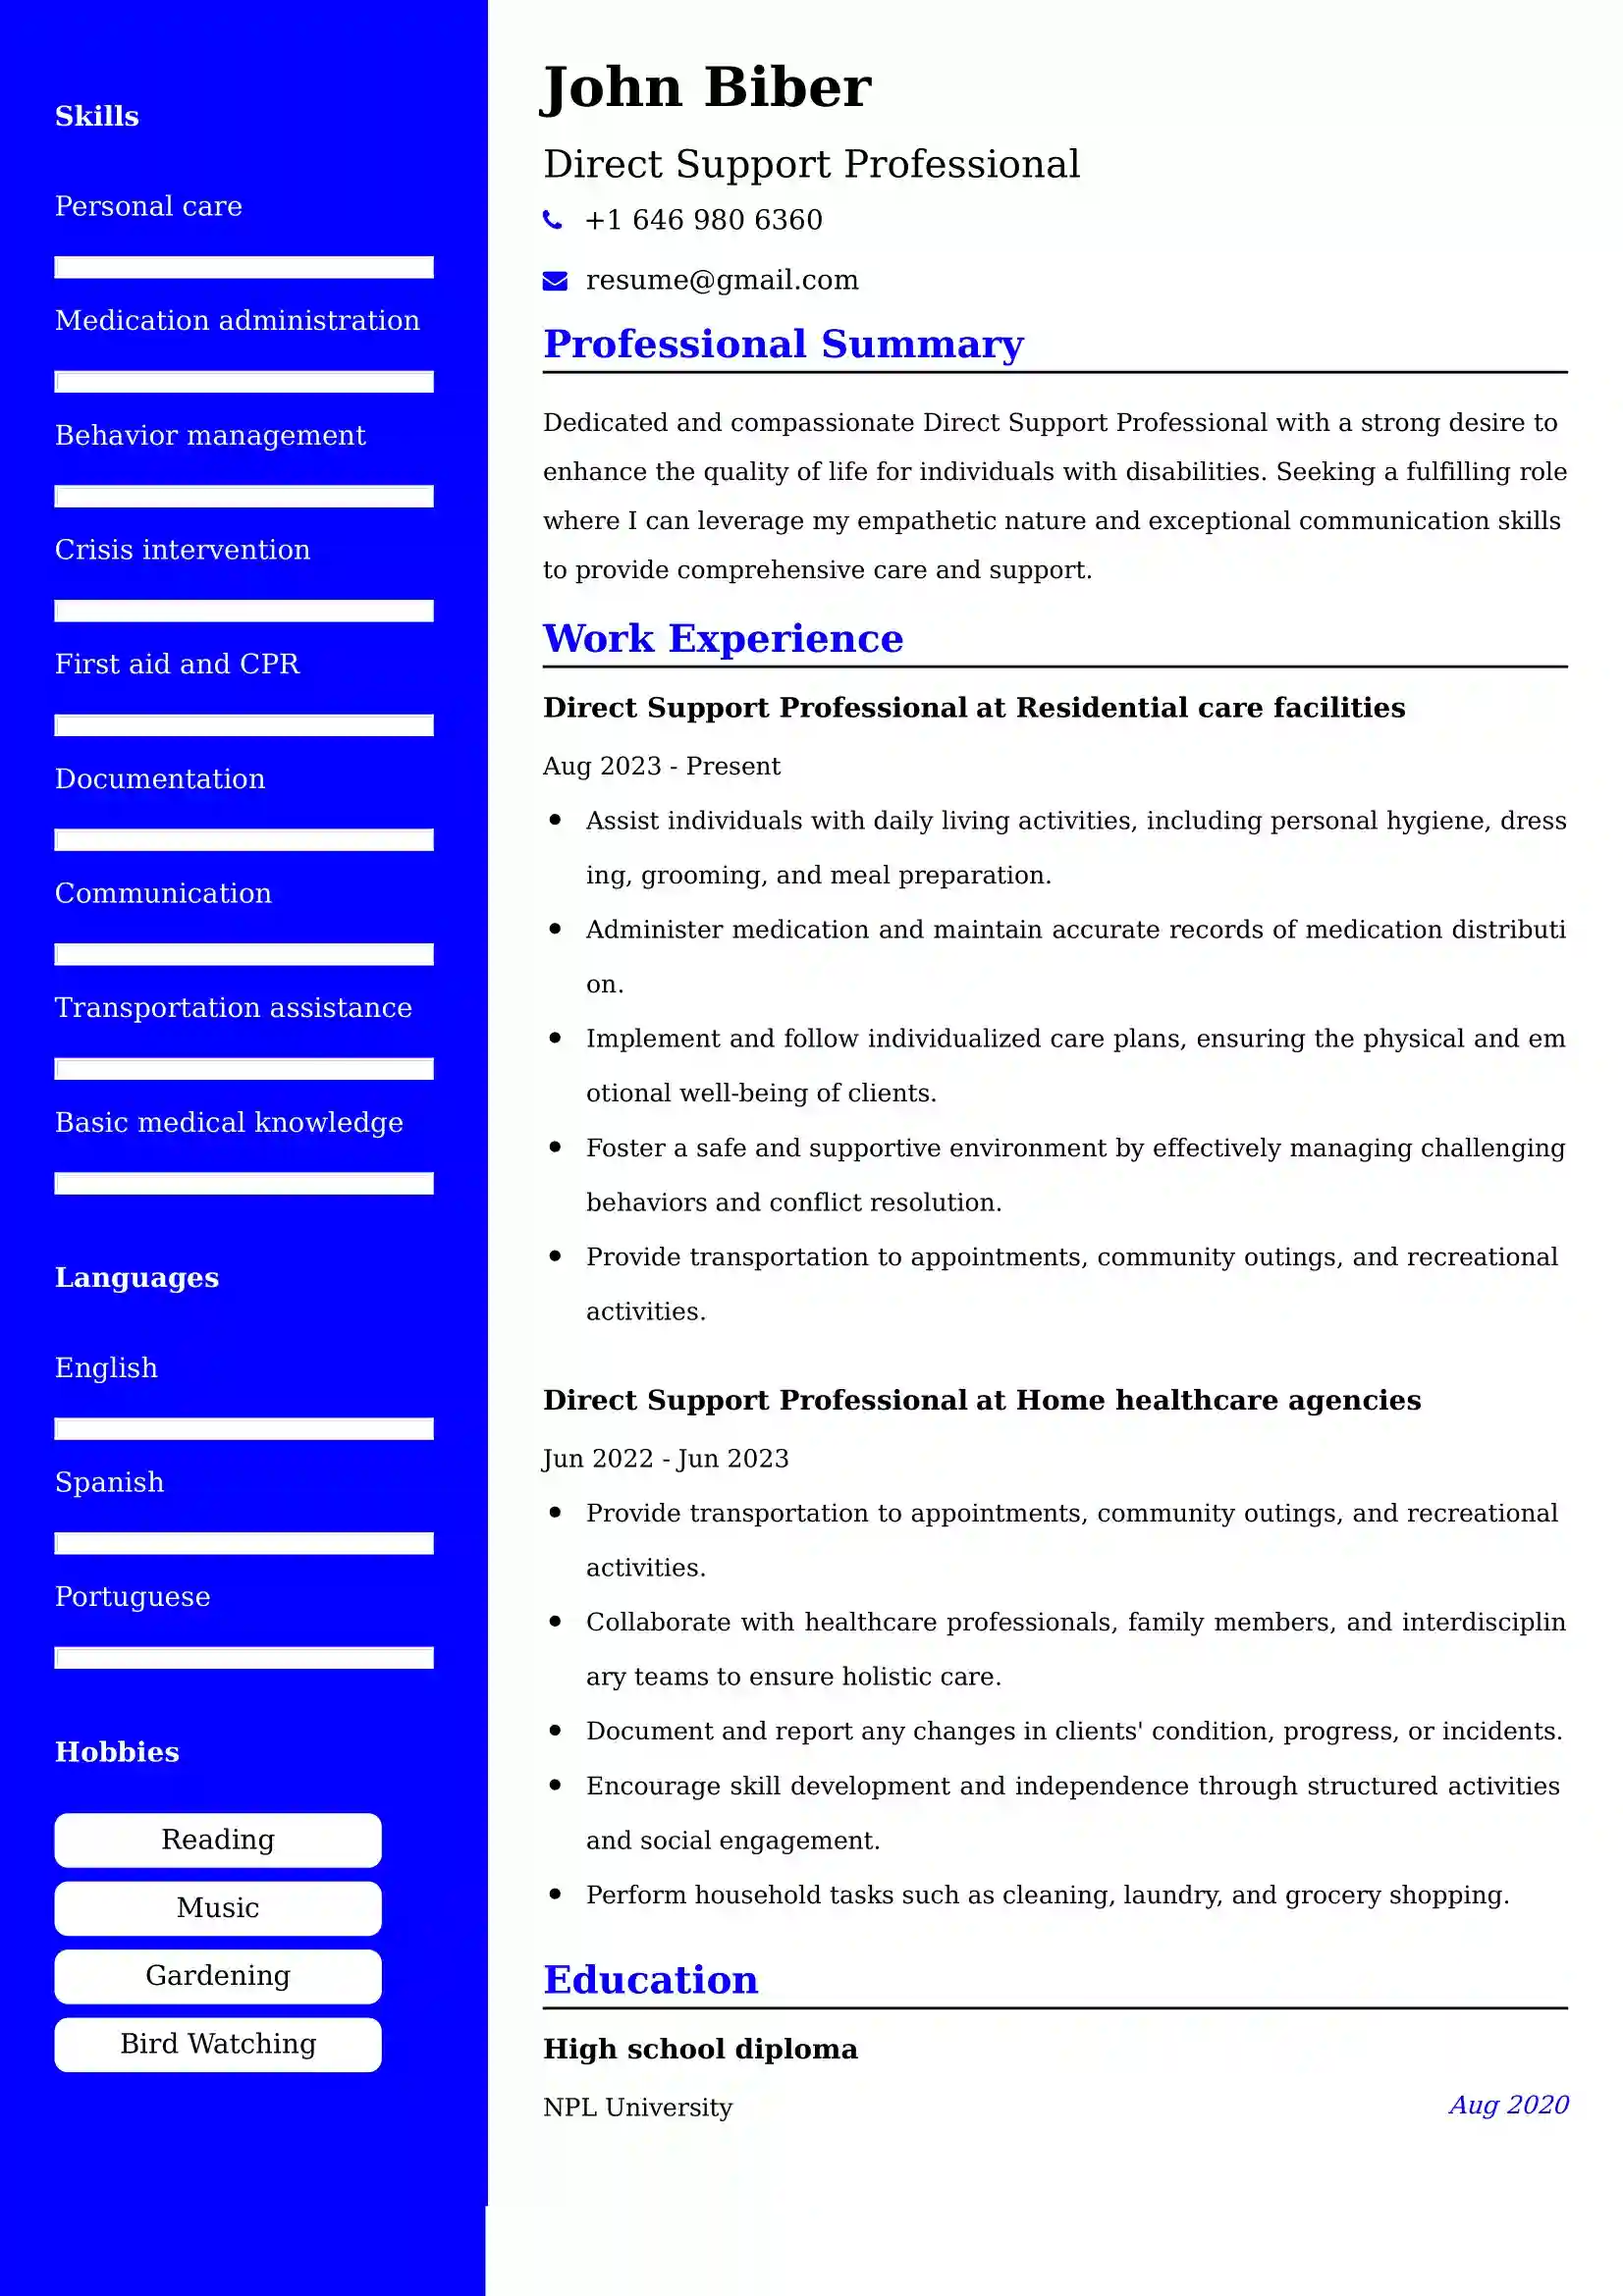 Direct Support Professional CV Examples - US Format